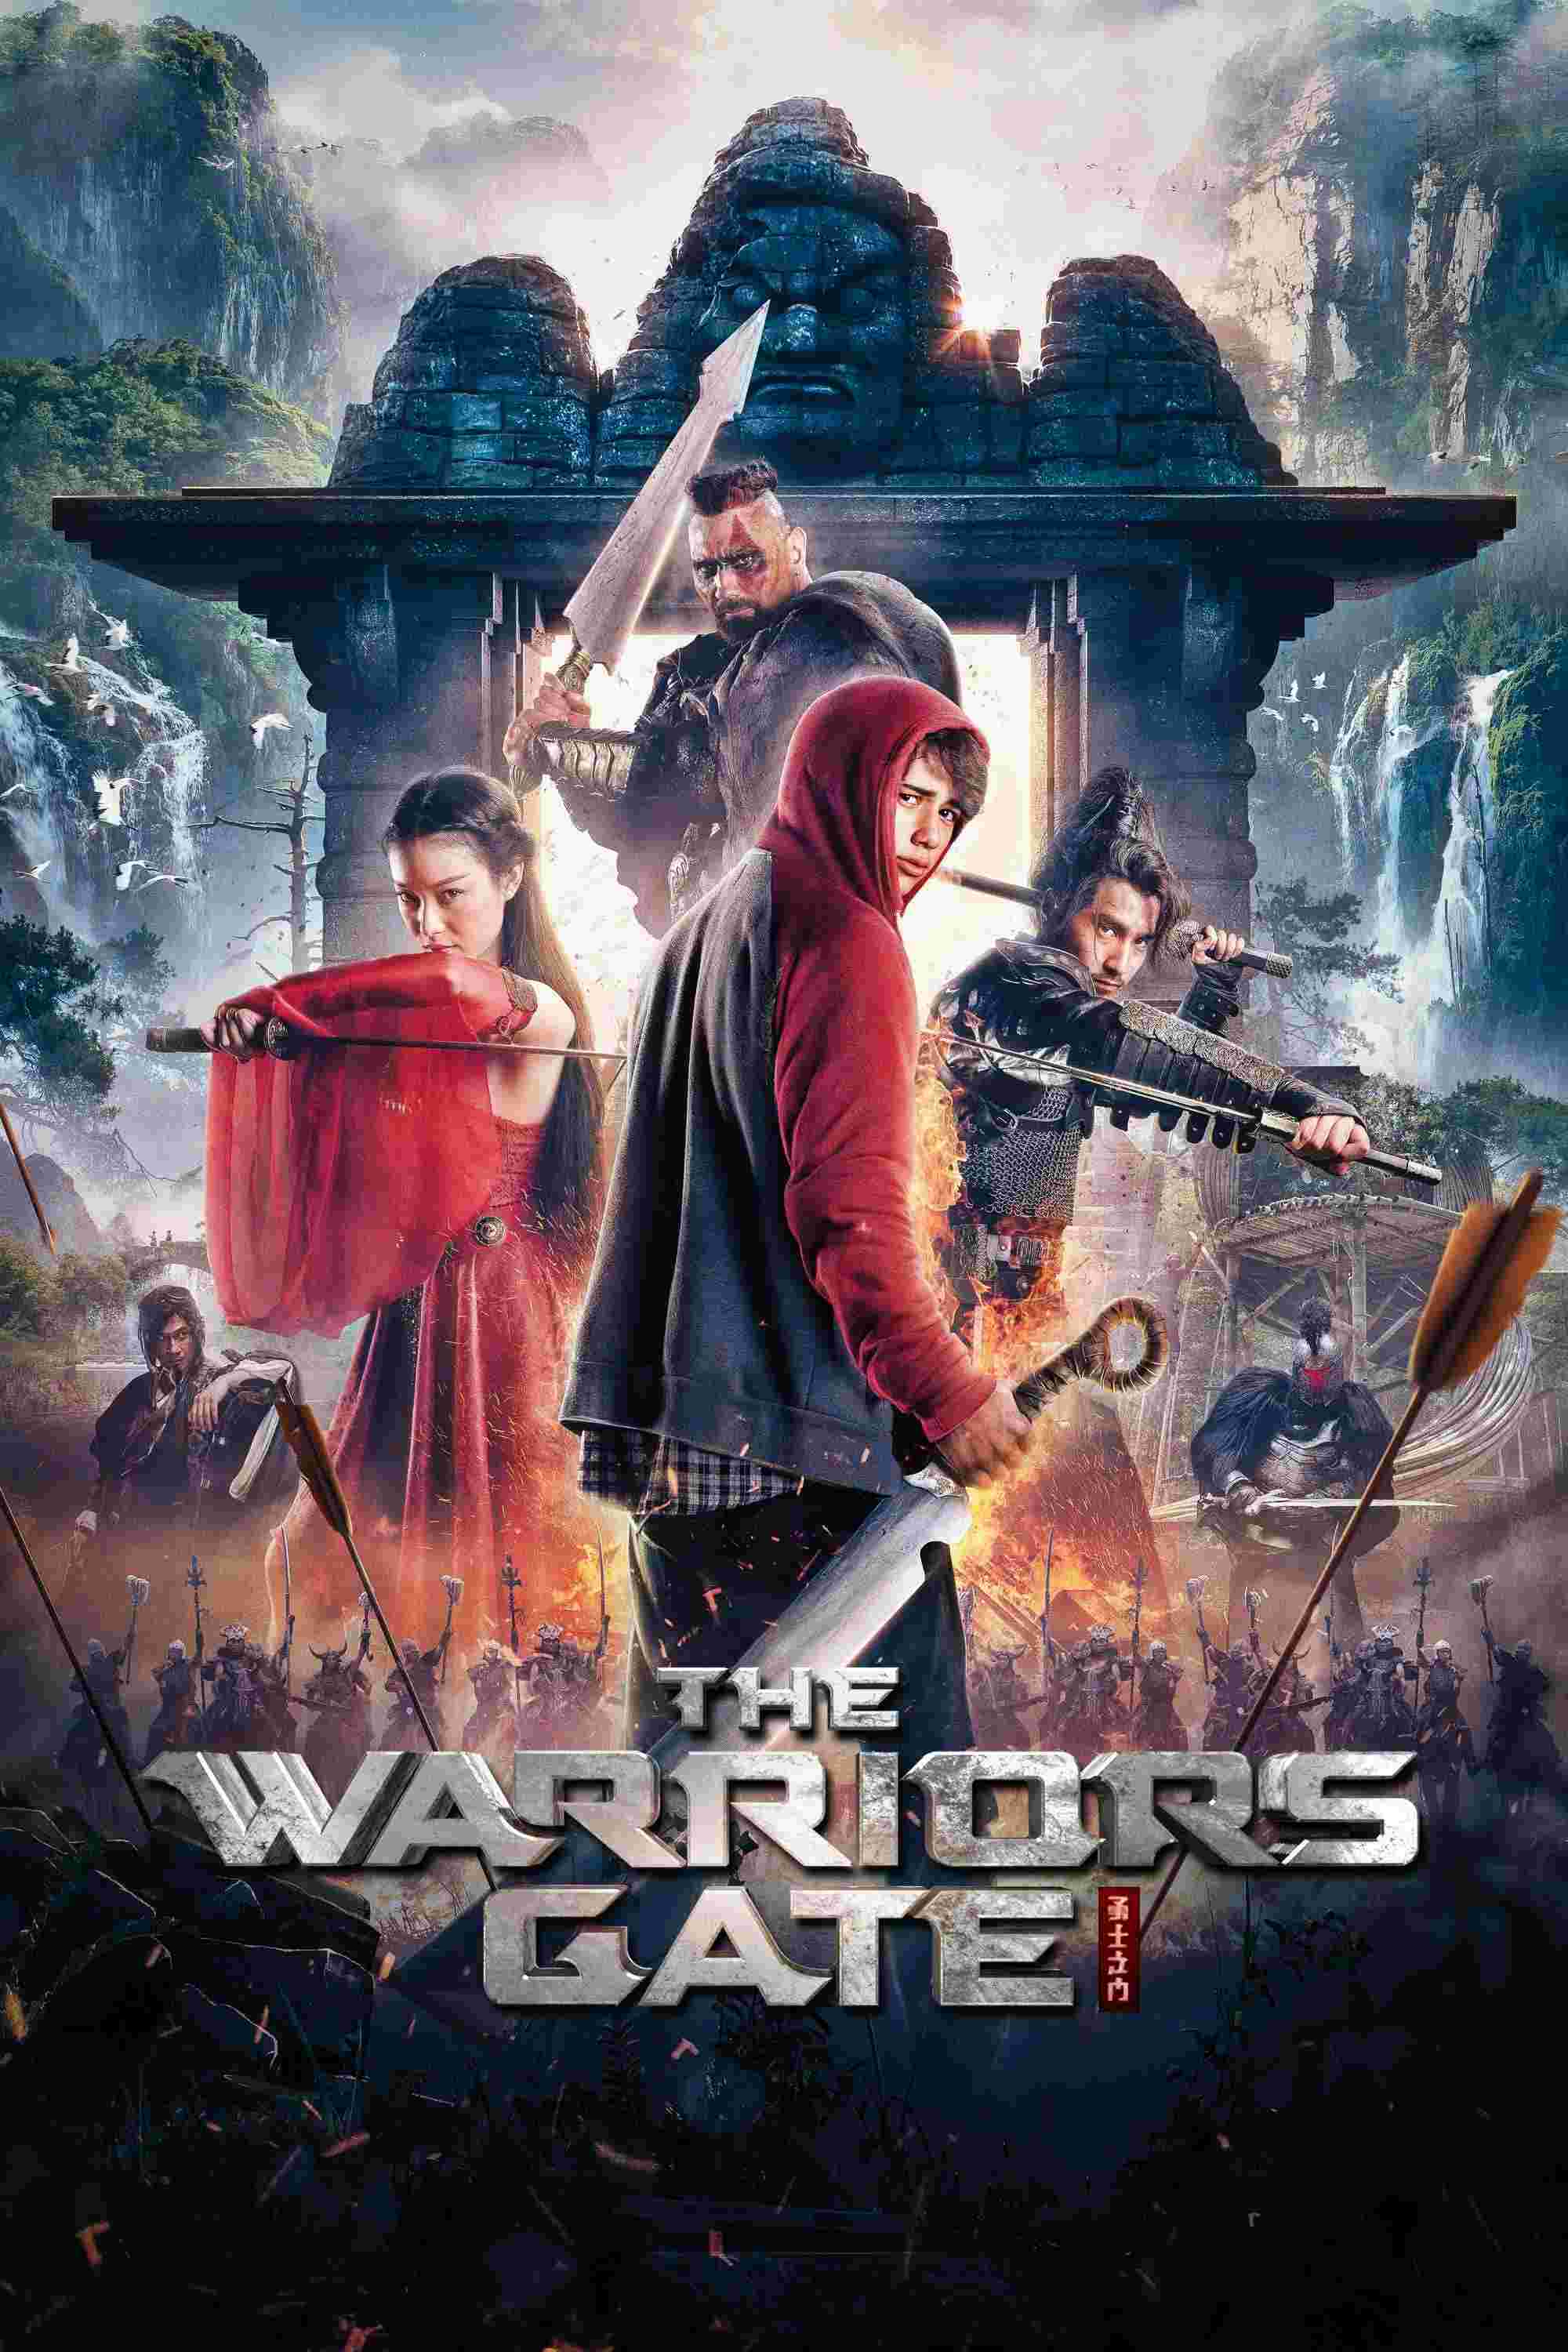 Enter the Warriors Gate (2016) Mark Chao